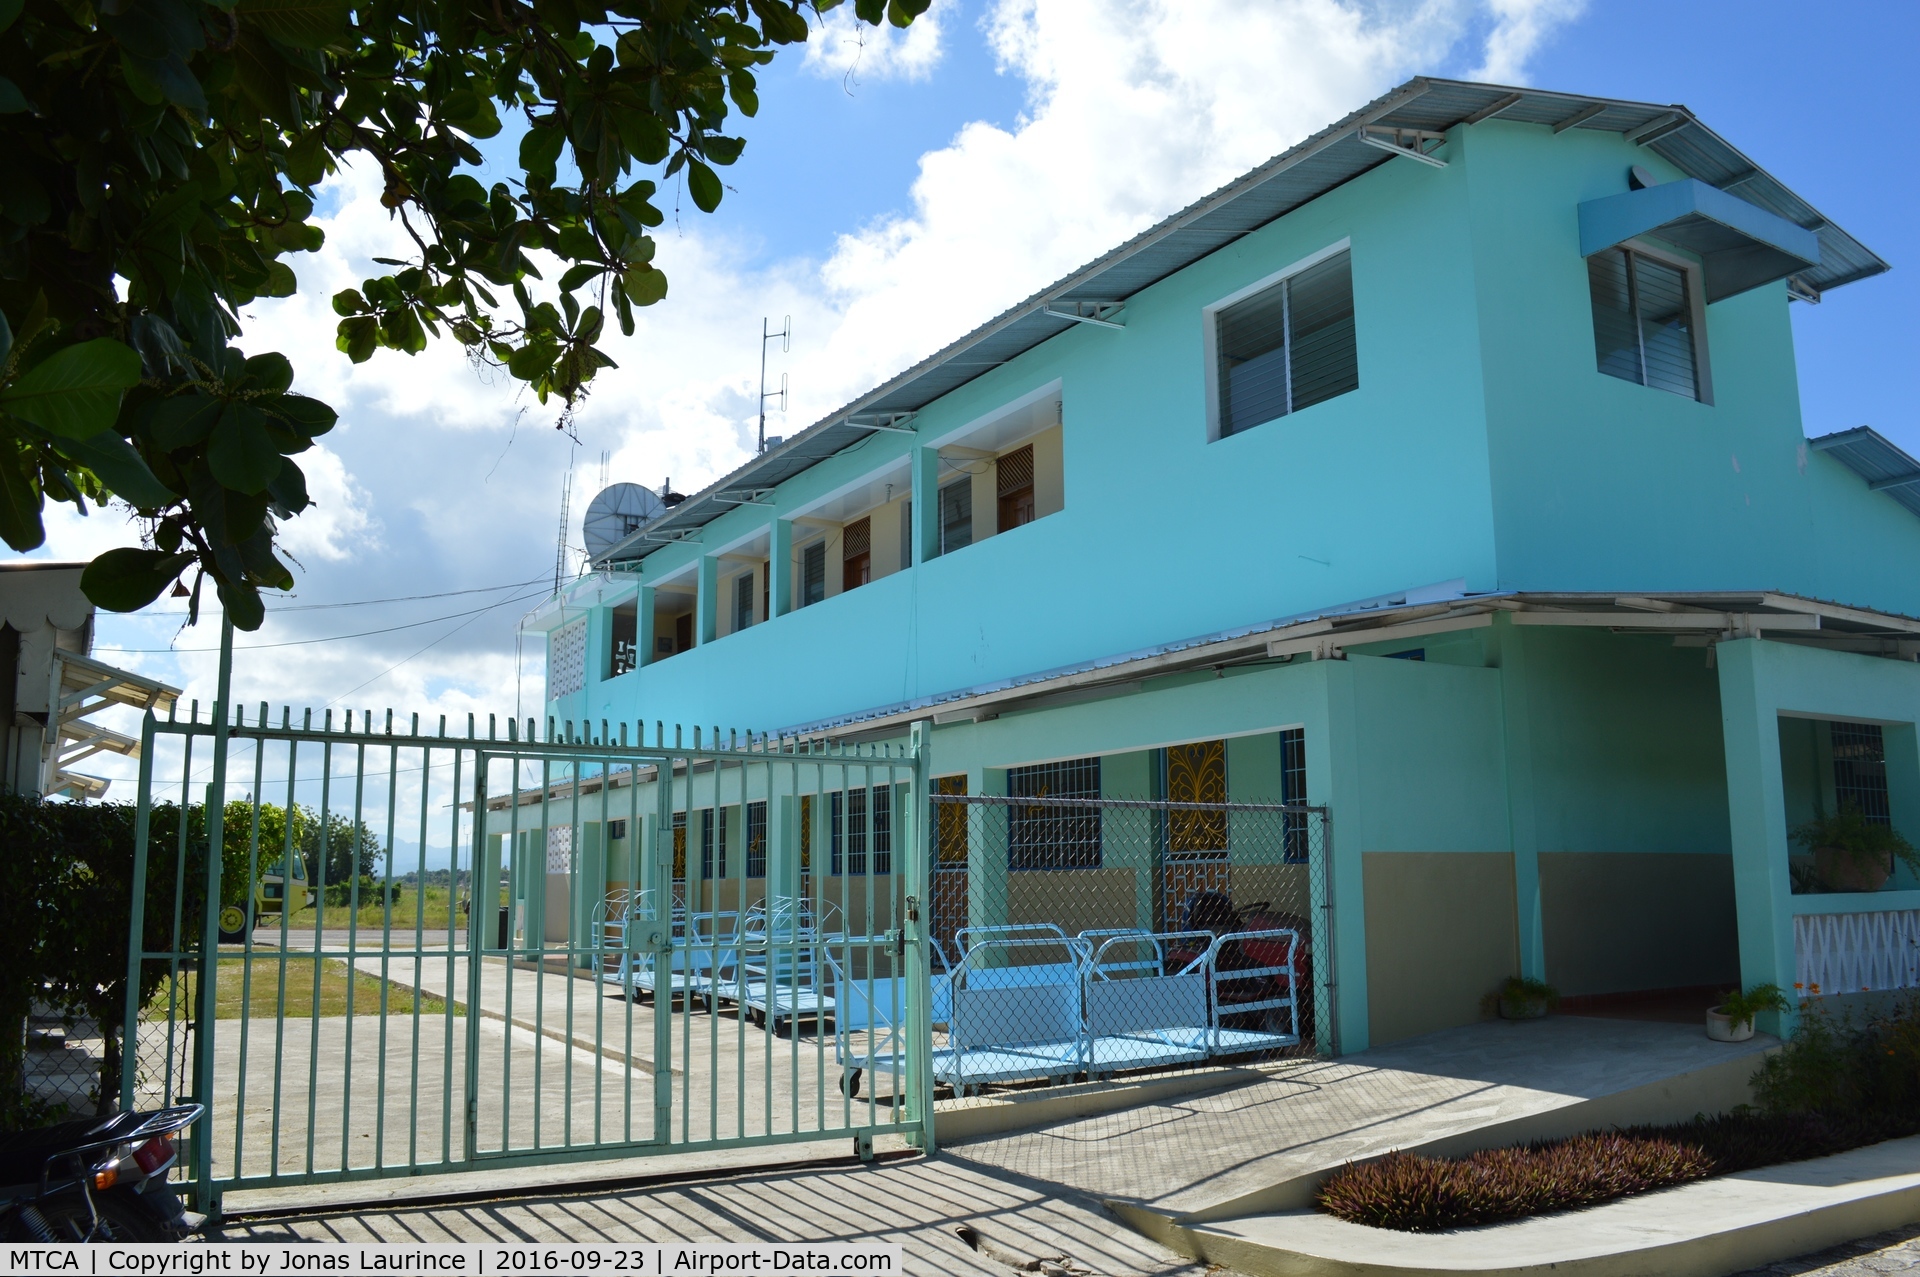 Les Cayes Airport, Les Cayes Haiti (MTCA) - The main building of the Airport of Les Cayes